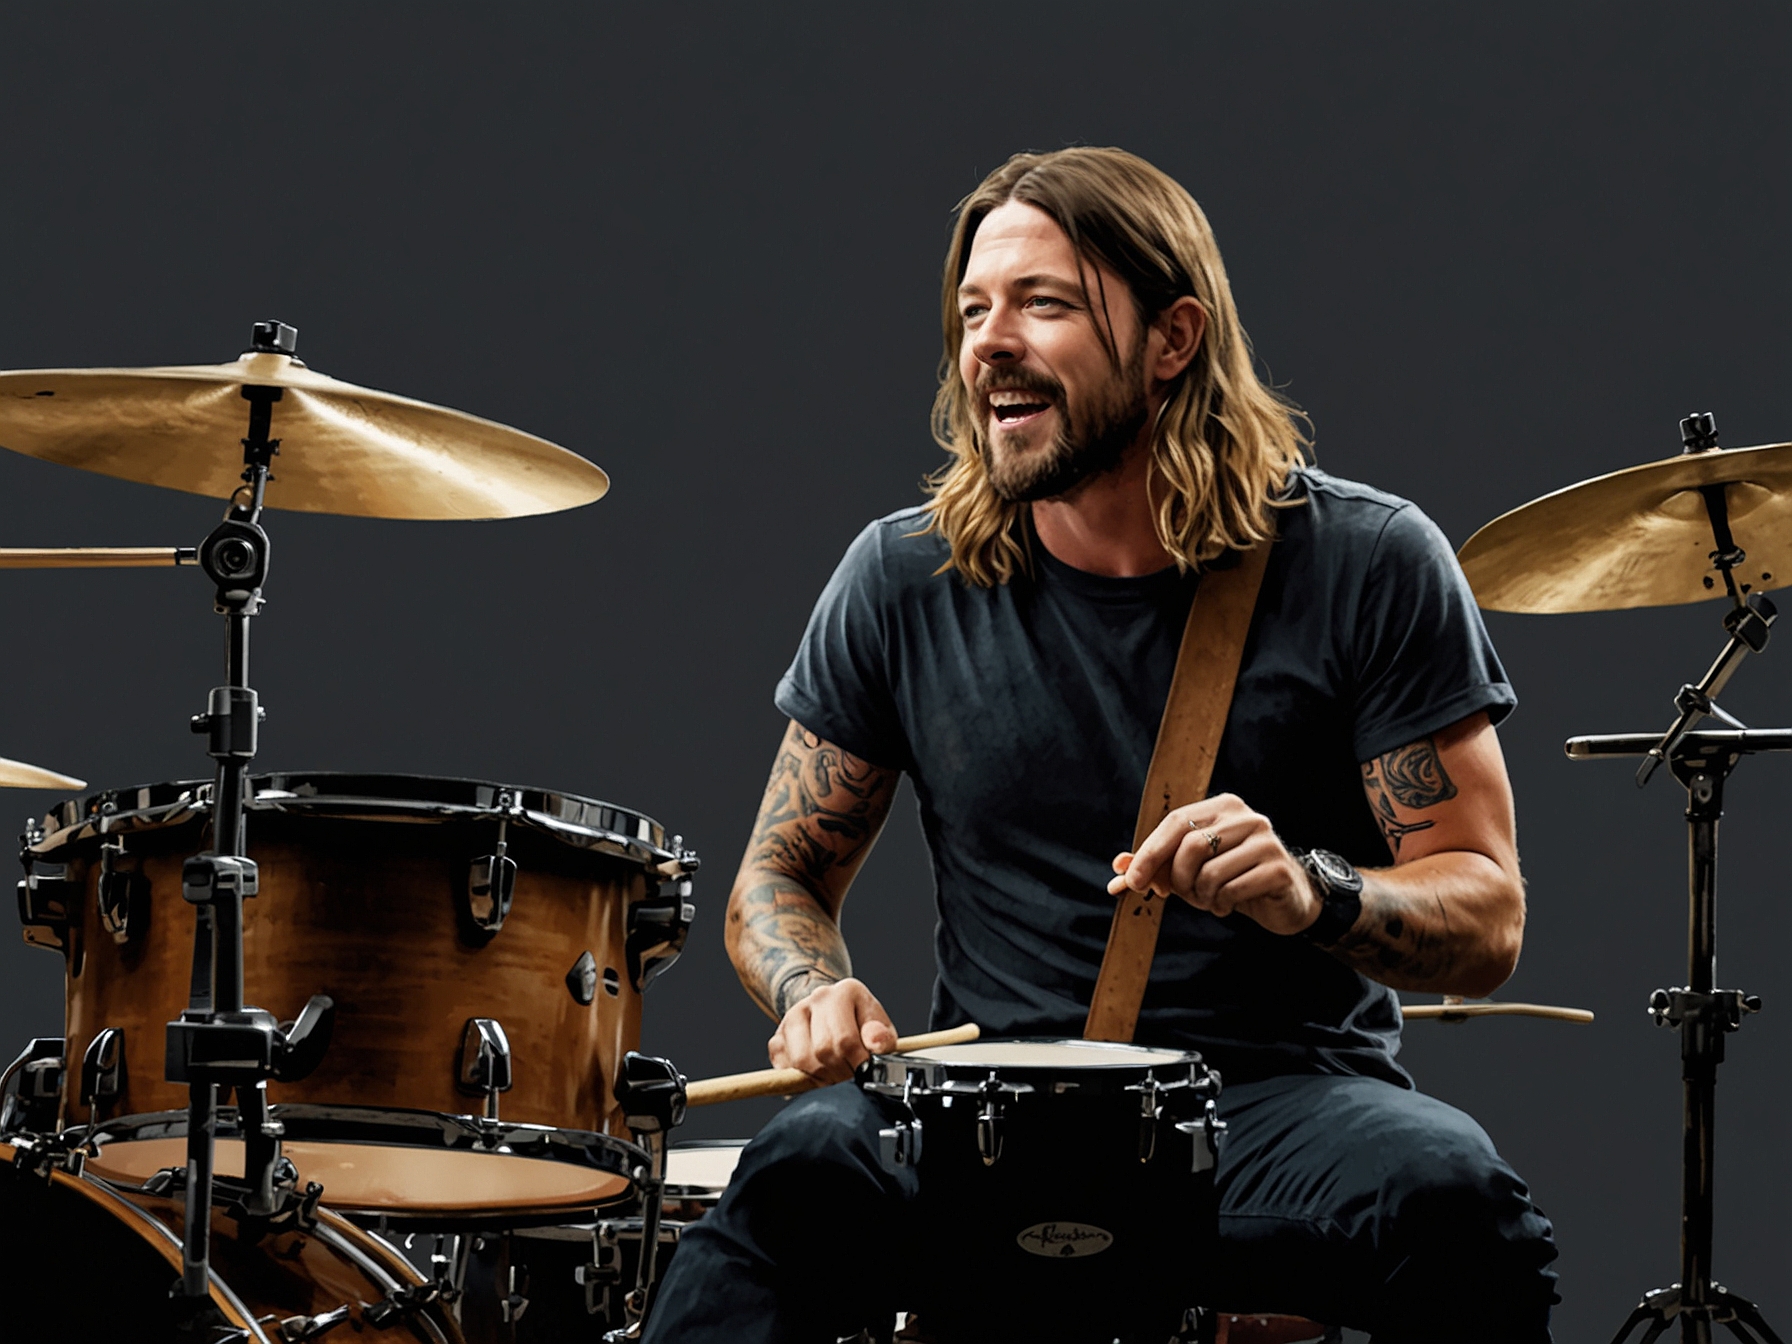 Shane Hawkins playing drums with Foo Fighters, delivering an emotionally charged performance of 'This Is A Call' in tribute to his late father, Taylor Hawkins.